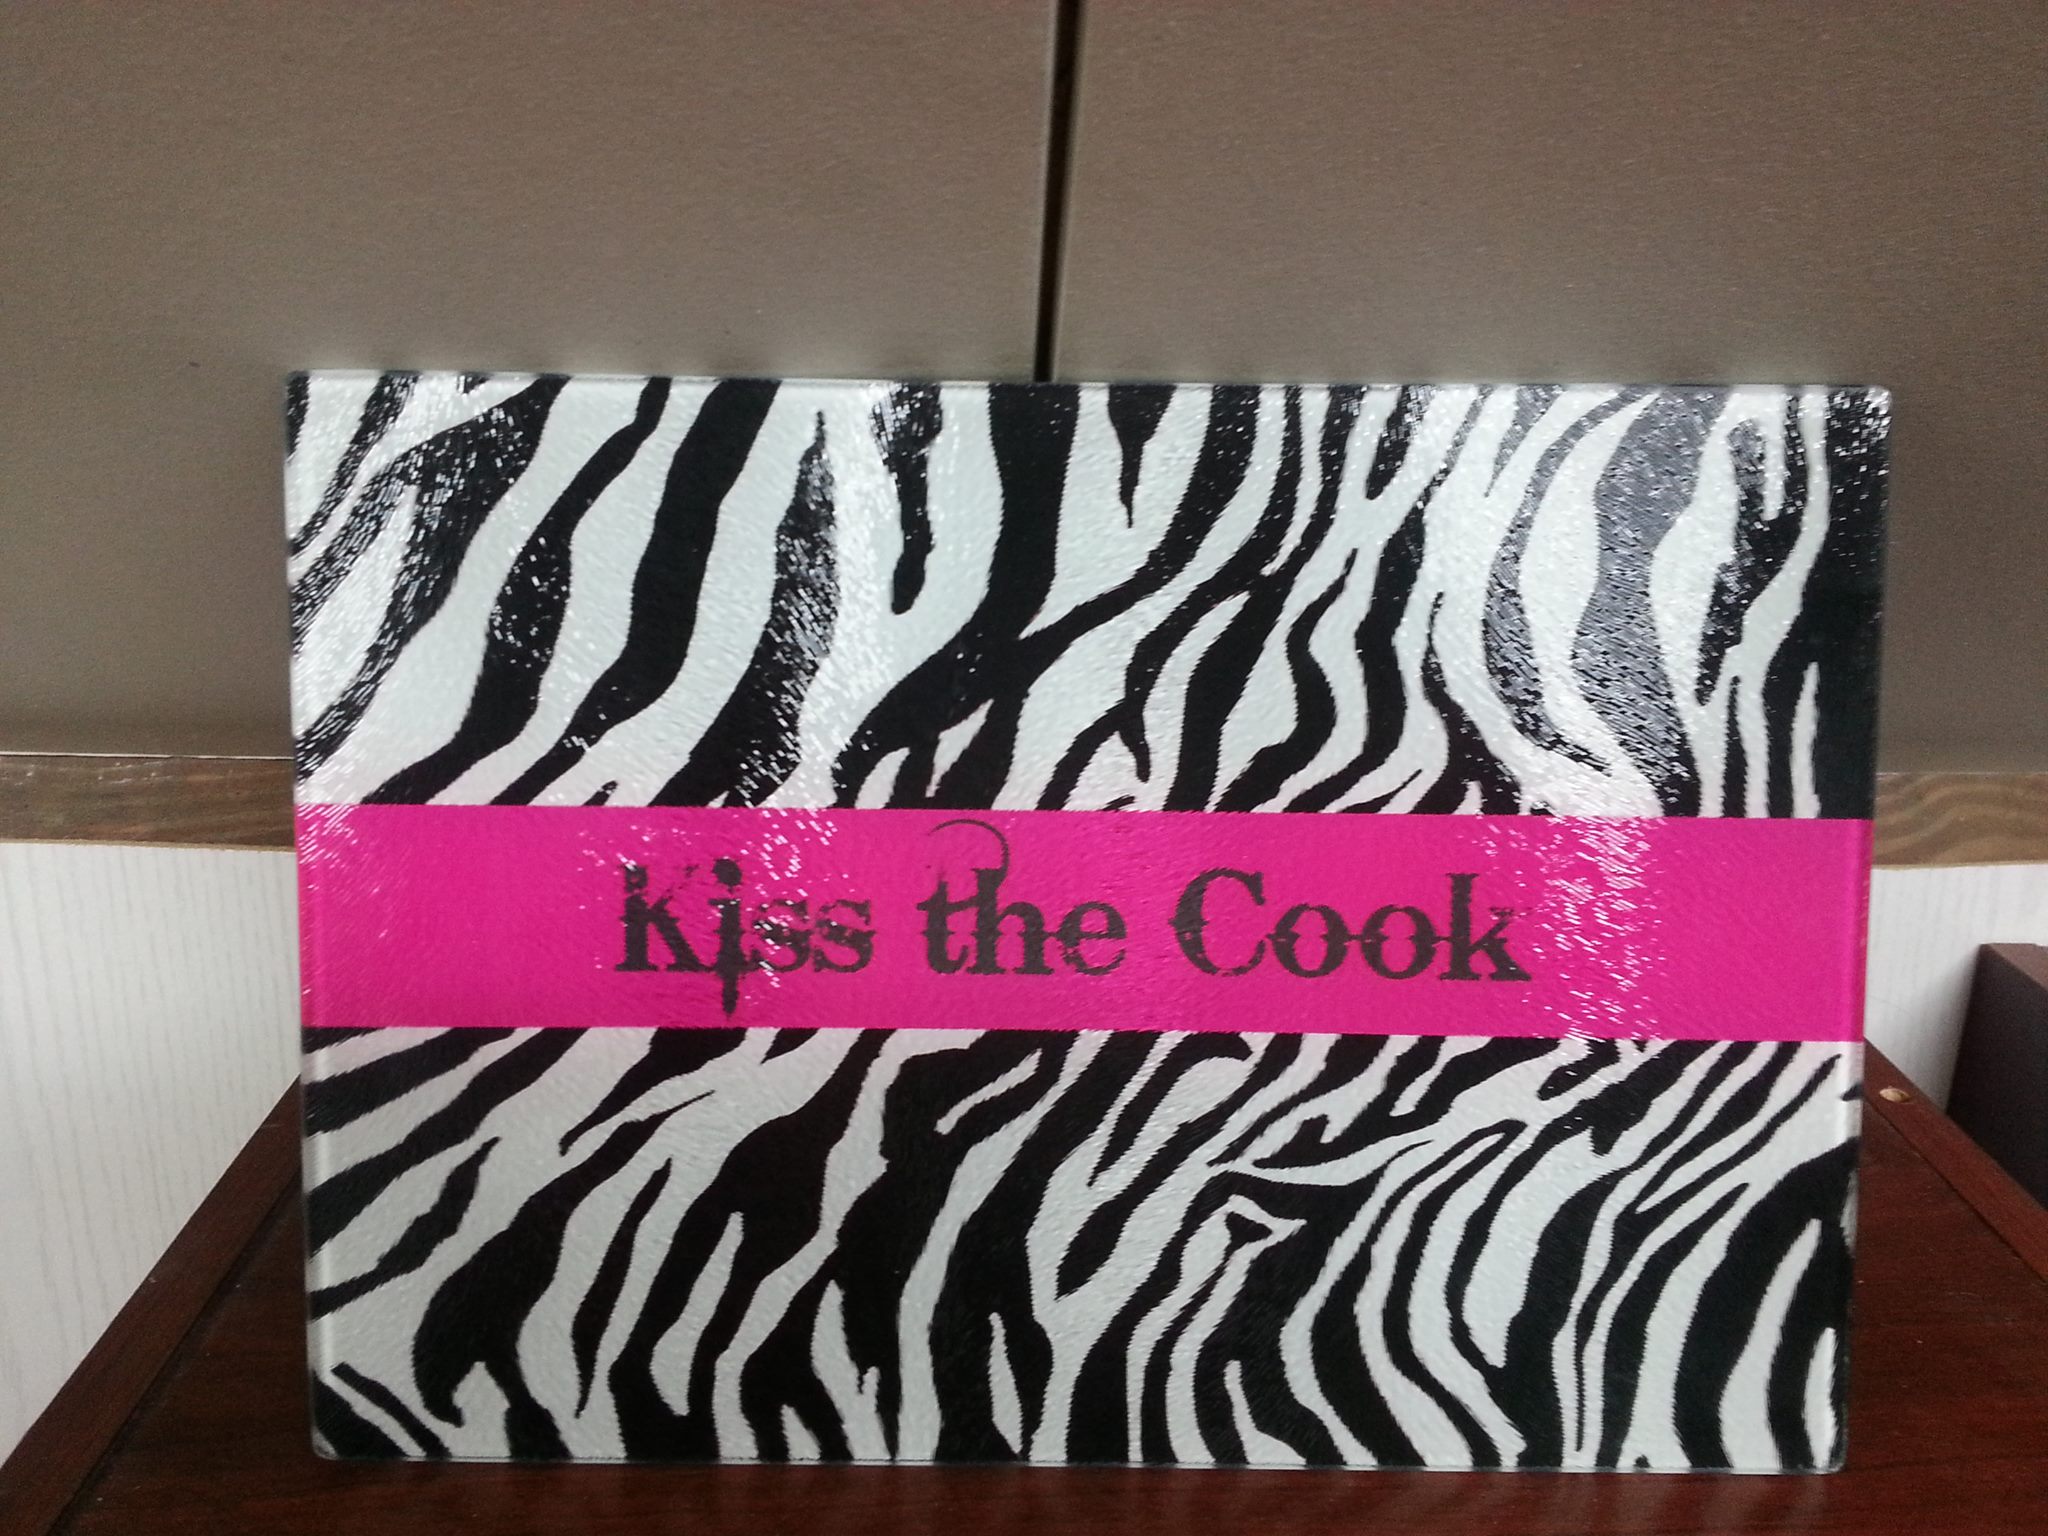 Cutting Board made with sublimation printing